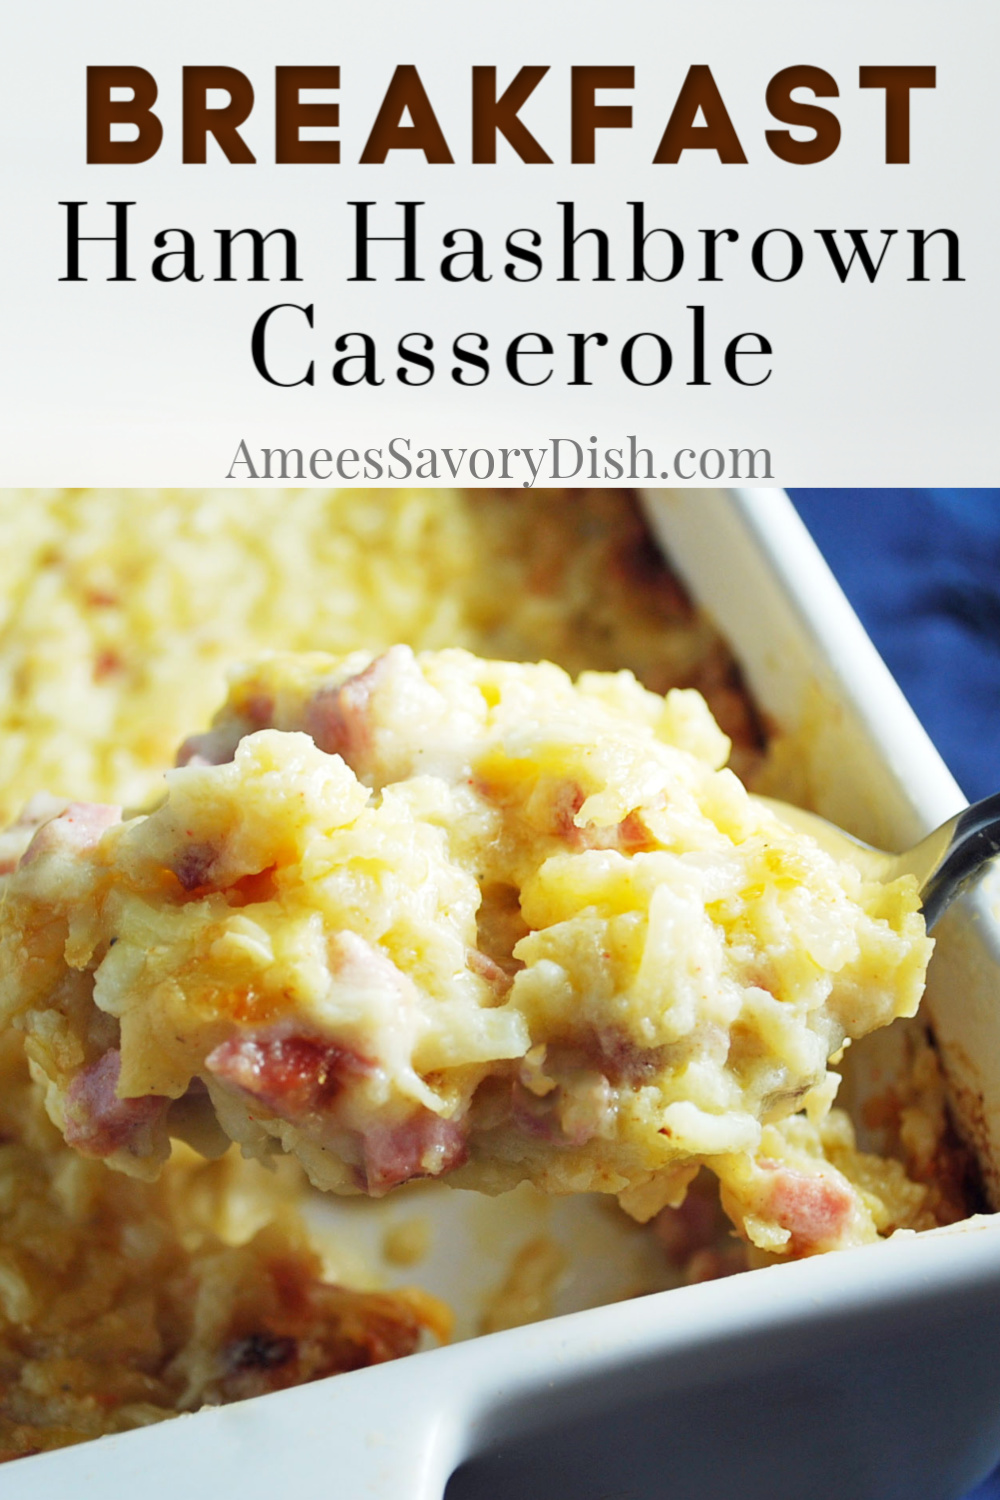 A delicious and easy recipe for Ham Hashbrown Casserole made with refrigerated hashbrowns, diced ham, sour cream, and sharp cheddar cheese.  This recipe makes a great brunch casserole, dinner entrée, or side dish.  #hashbrowncasserole #casserole #breakfastcasserole via @Ameessavorydish